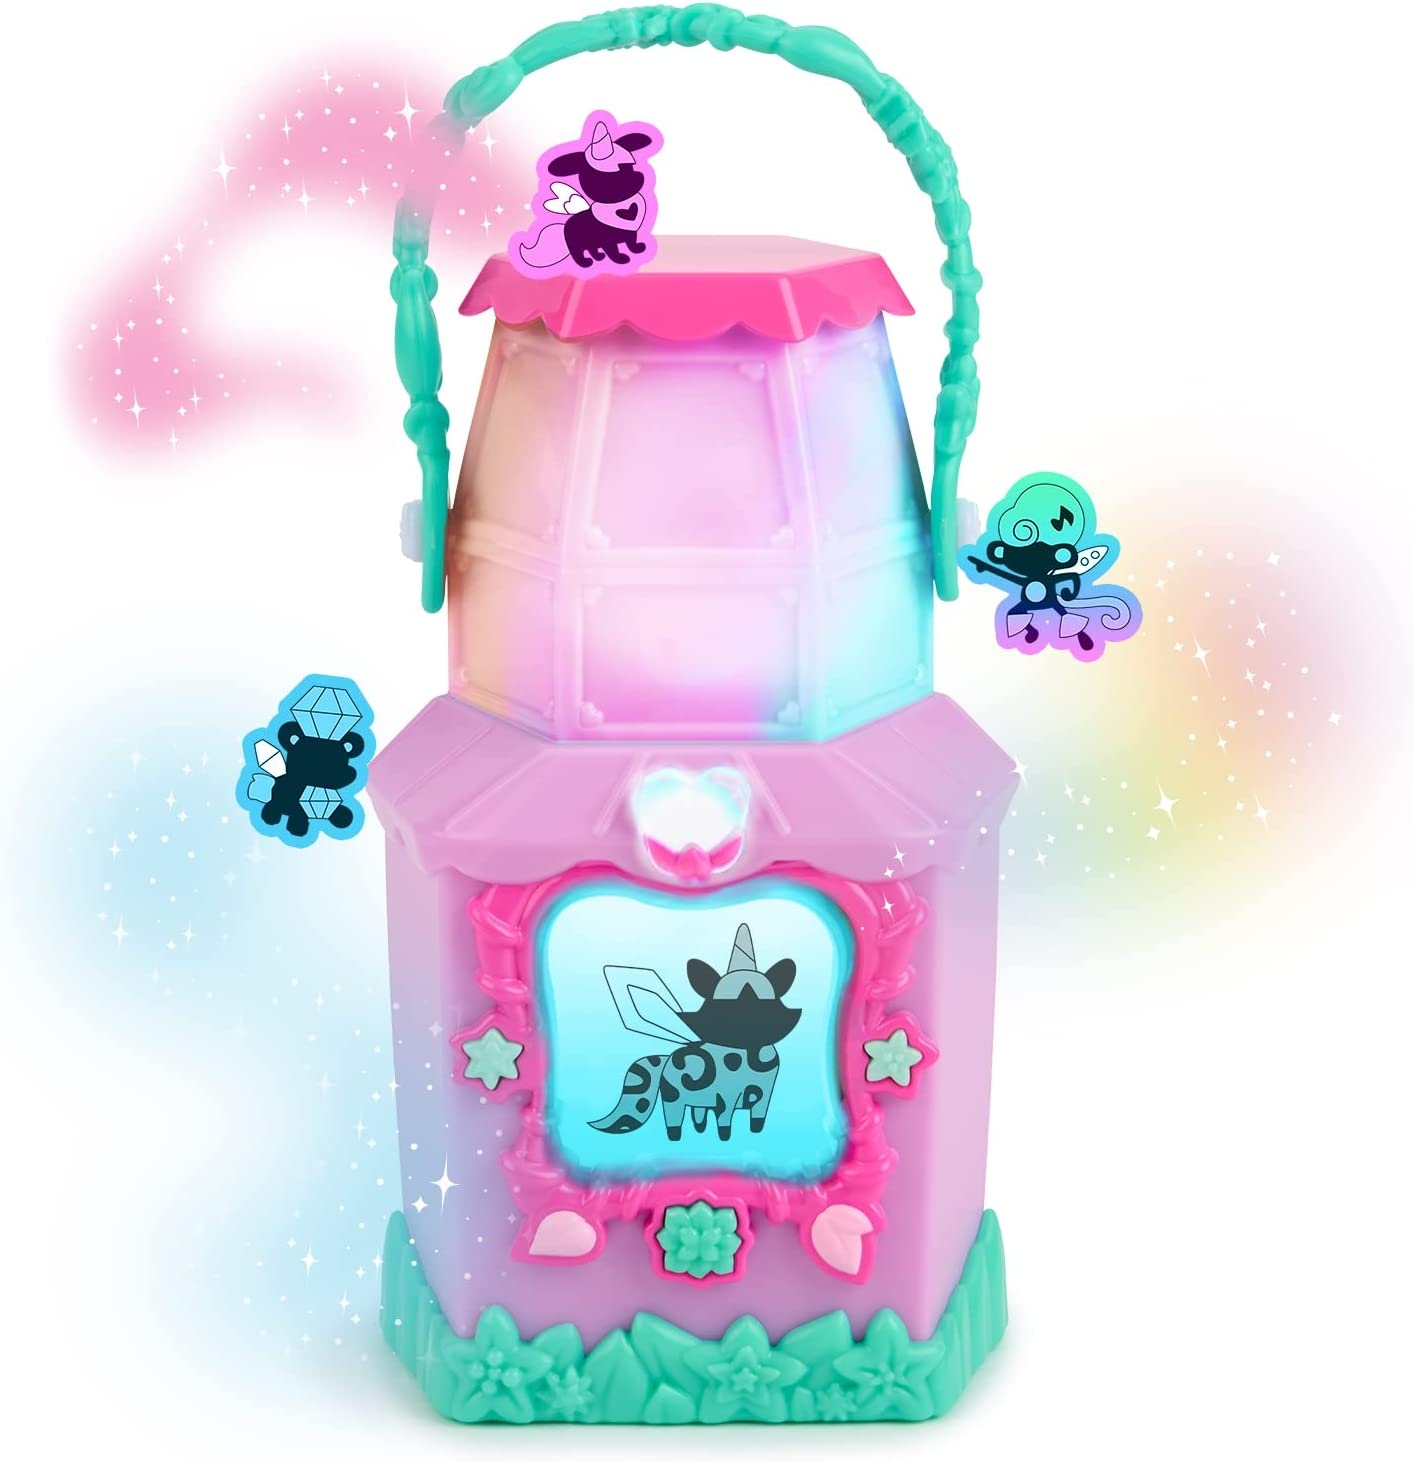 Got2Glow Fairy Pet Finder – Magic Fairy Jar Toy Includes 40+ Electronic Pets (Purple) Import To Shop ×Product customization